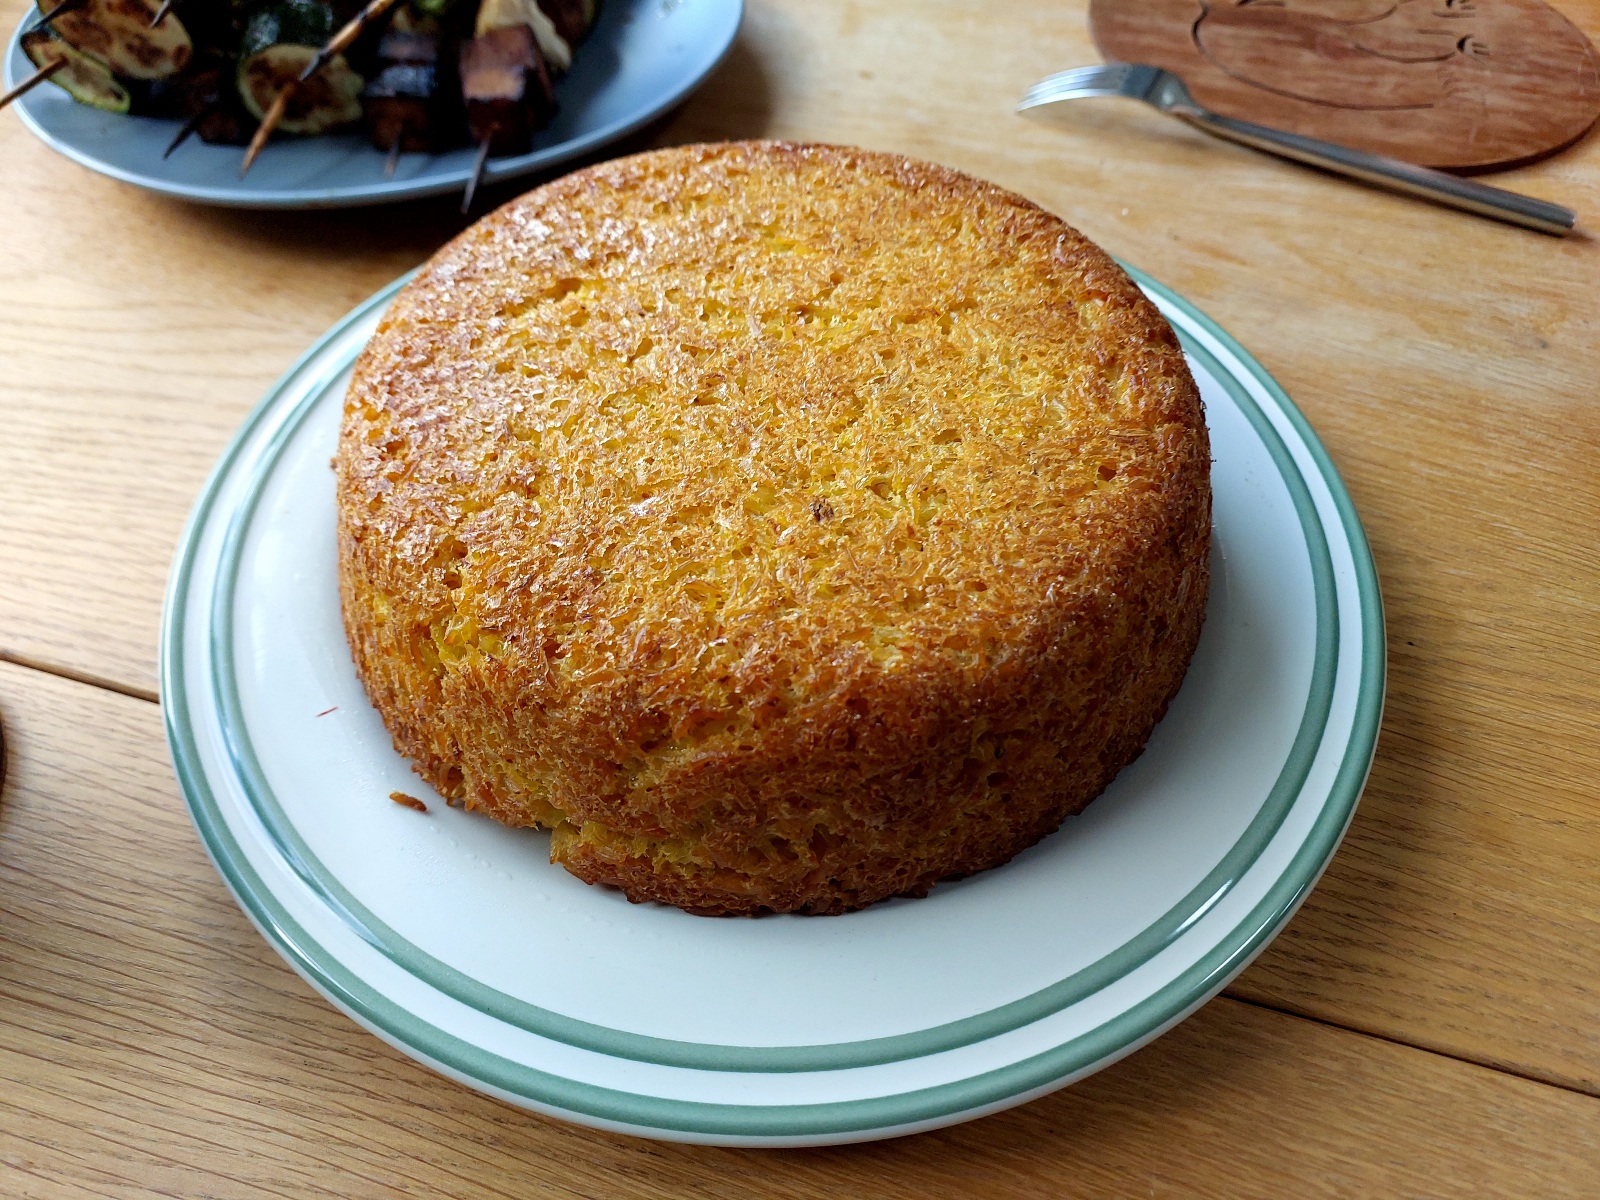 Tahchin (Persian Saffron Rice Cake) turned out